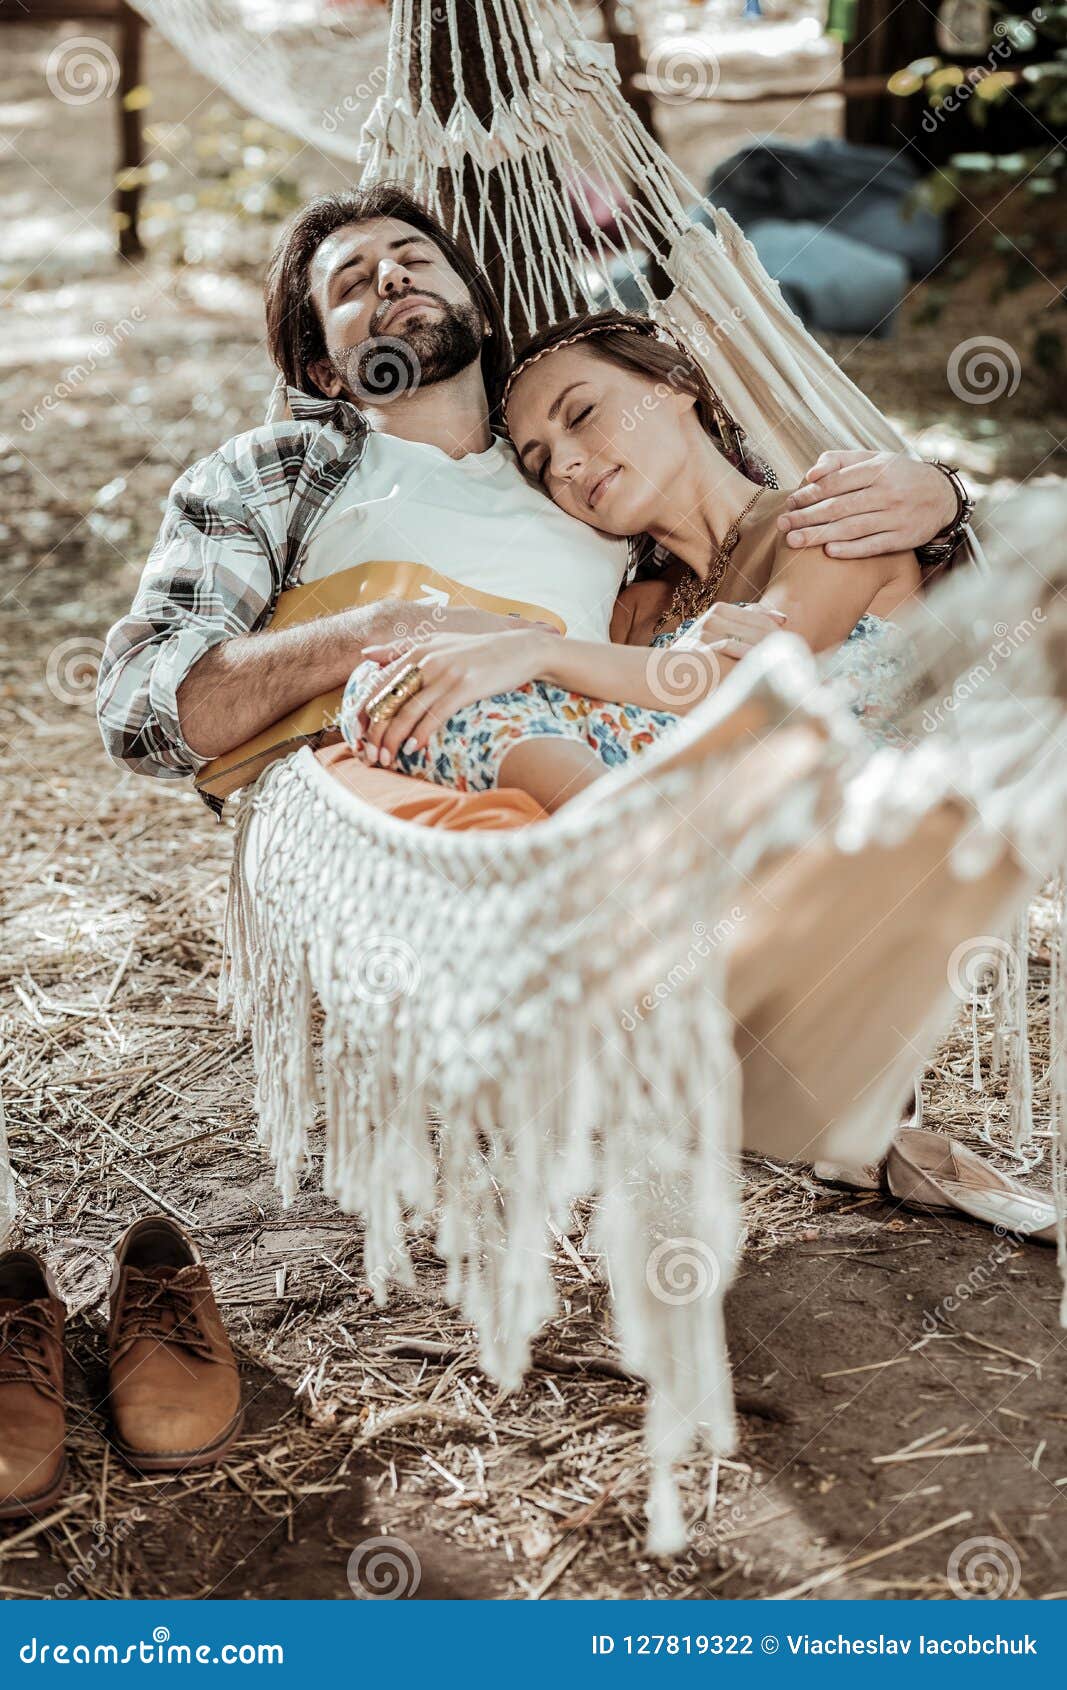 Sweet Couple Having a Nap in a Hammock Stock Photo - Image of ...